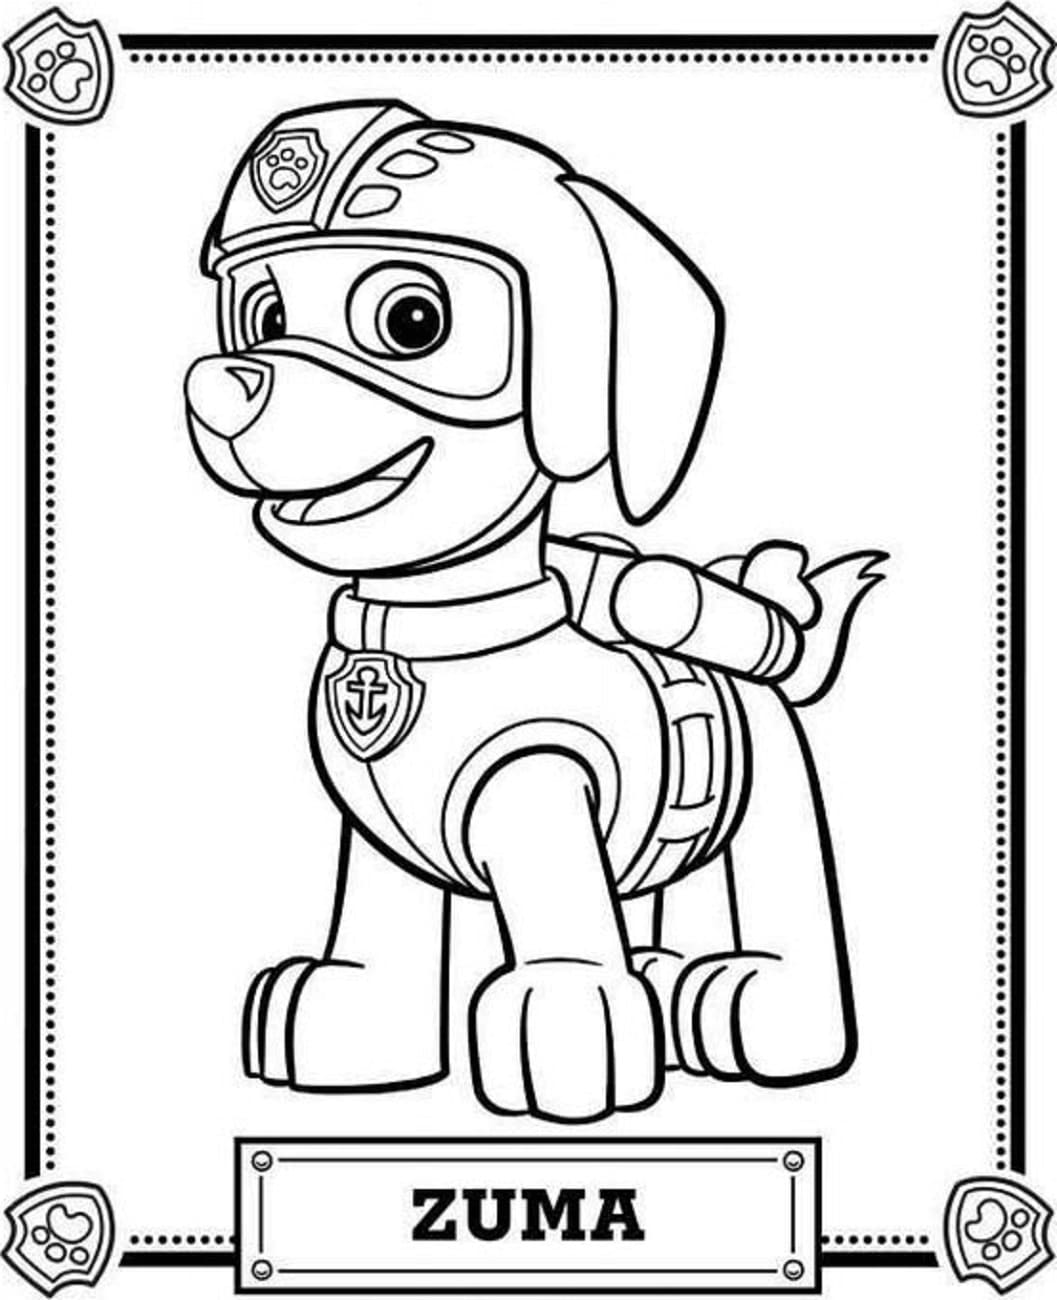 Zuma Souriant coloring page